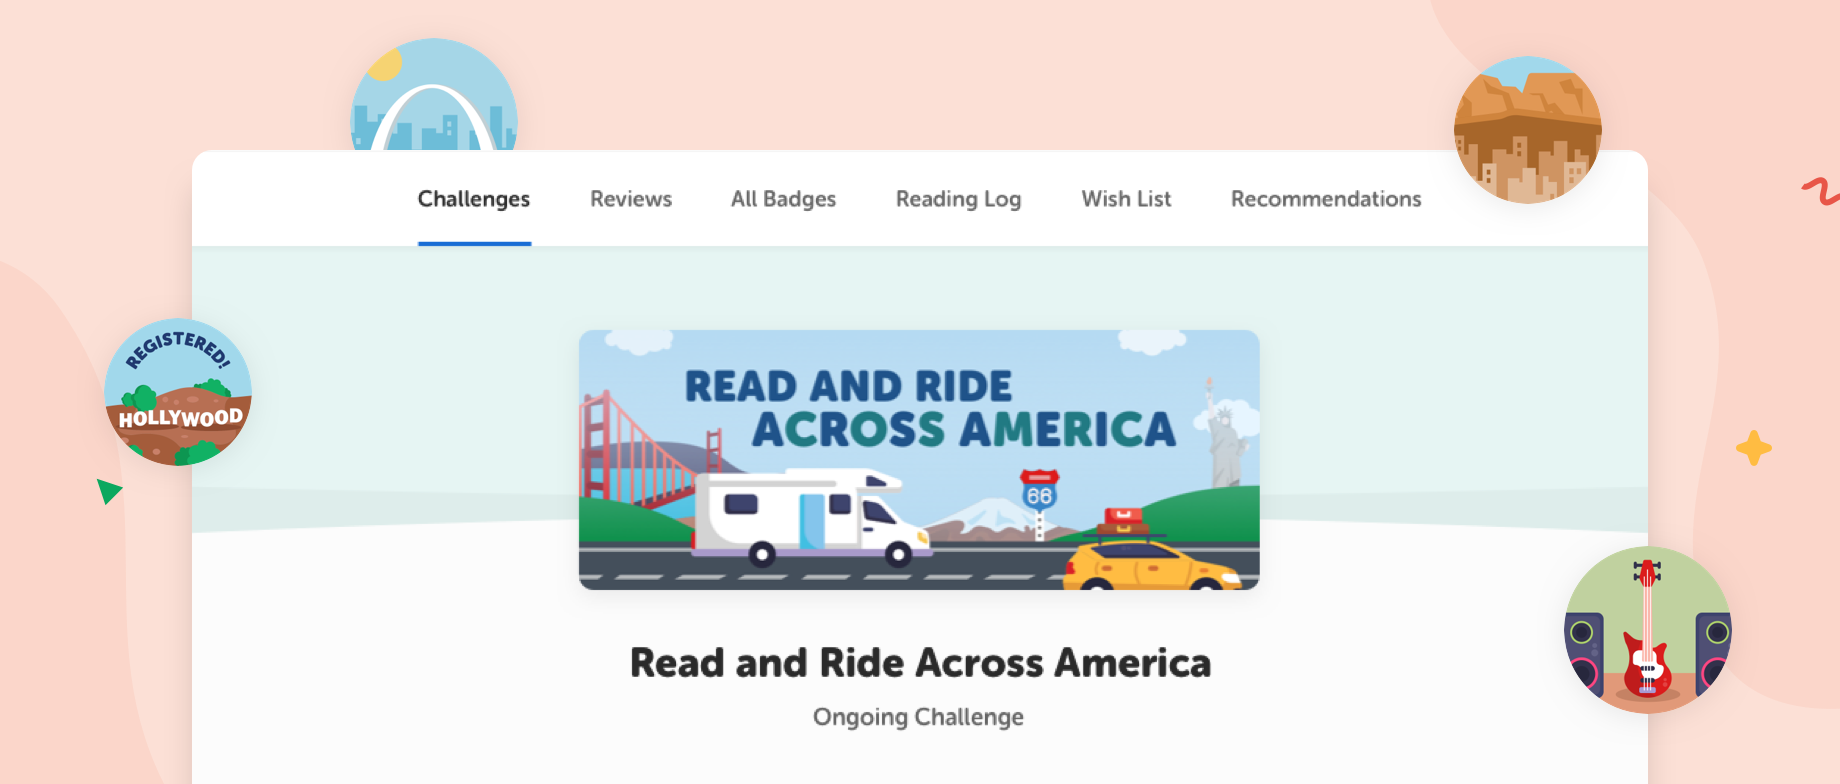 Read and Ride Across America banner showing a scenic landscape with an RV and car driving on a highway.